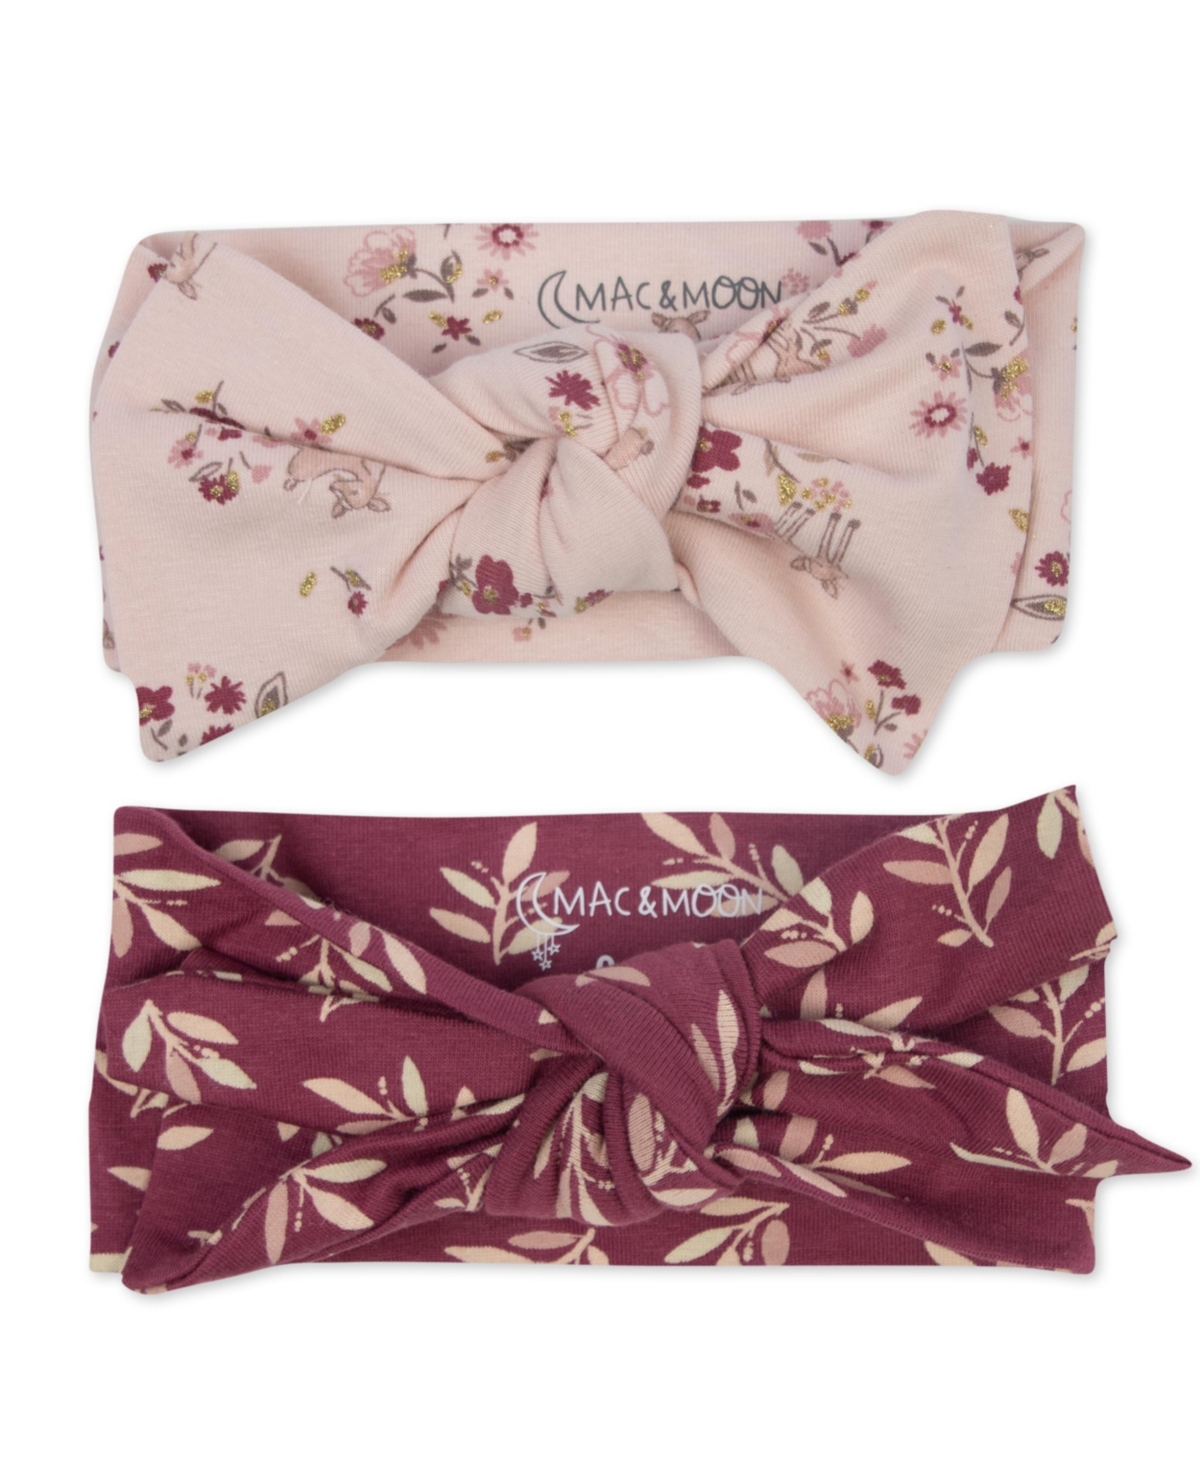 Mac & Moon Baby Girls 2-pack Cotton Headband In Pink/floral